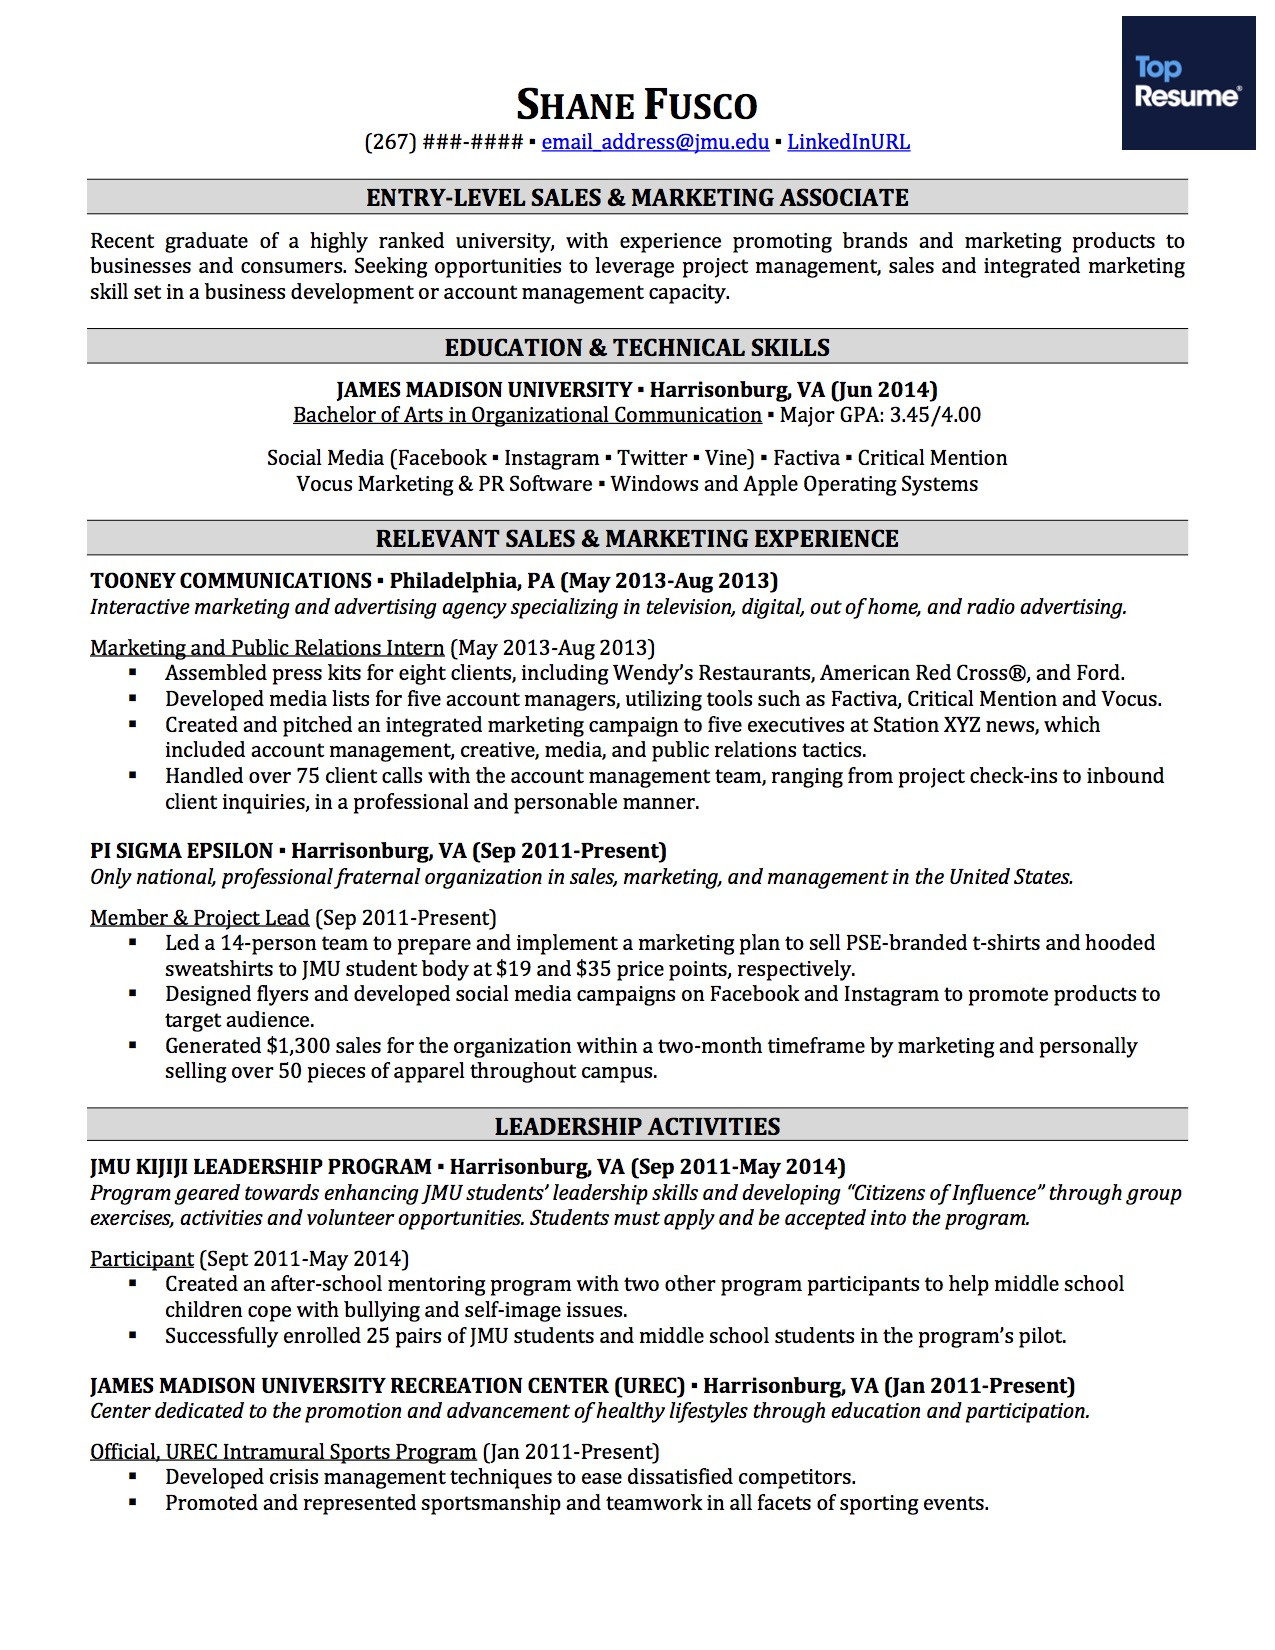 No Work Experience College Resume Sample How to Make A Great Resume with No Experience topresume